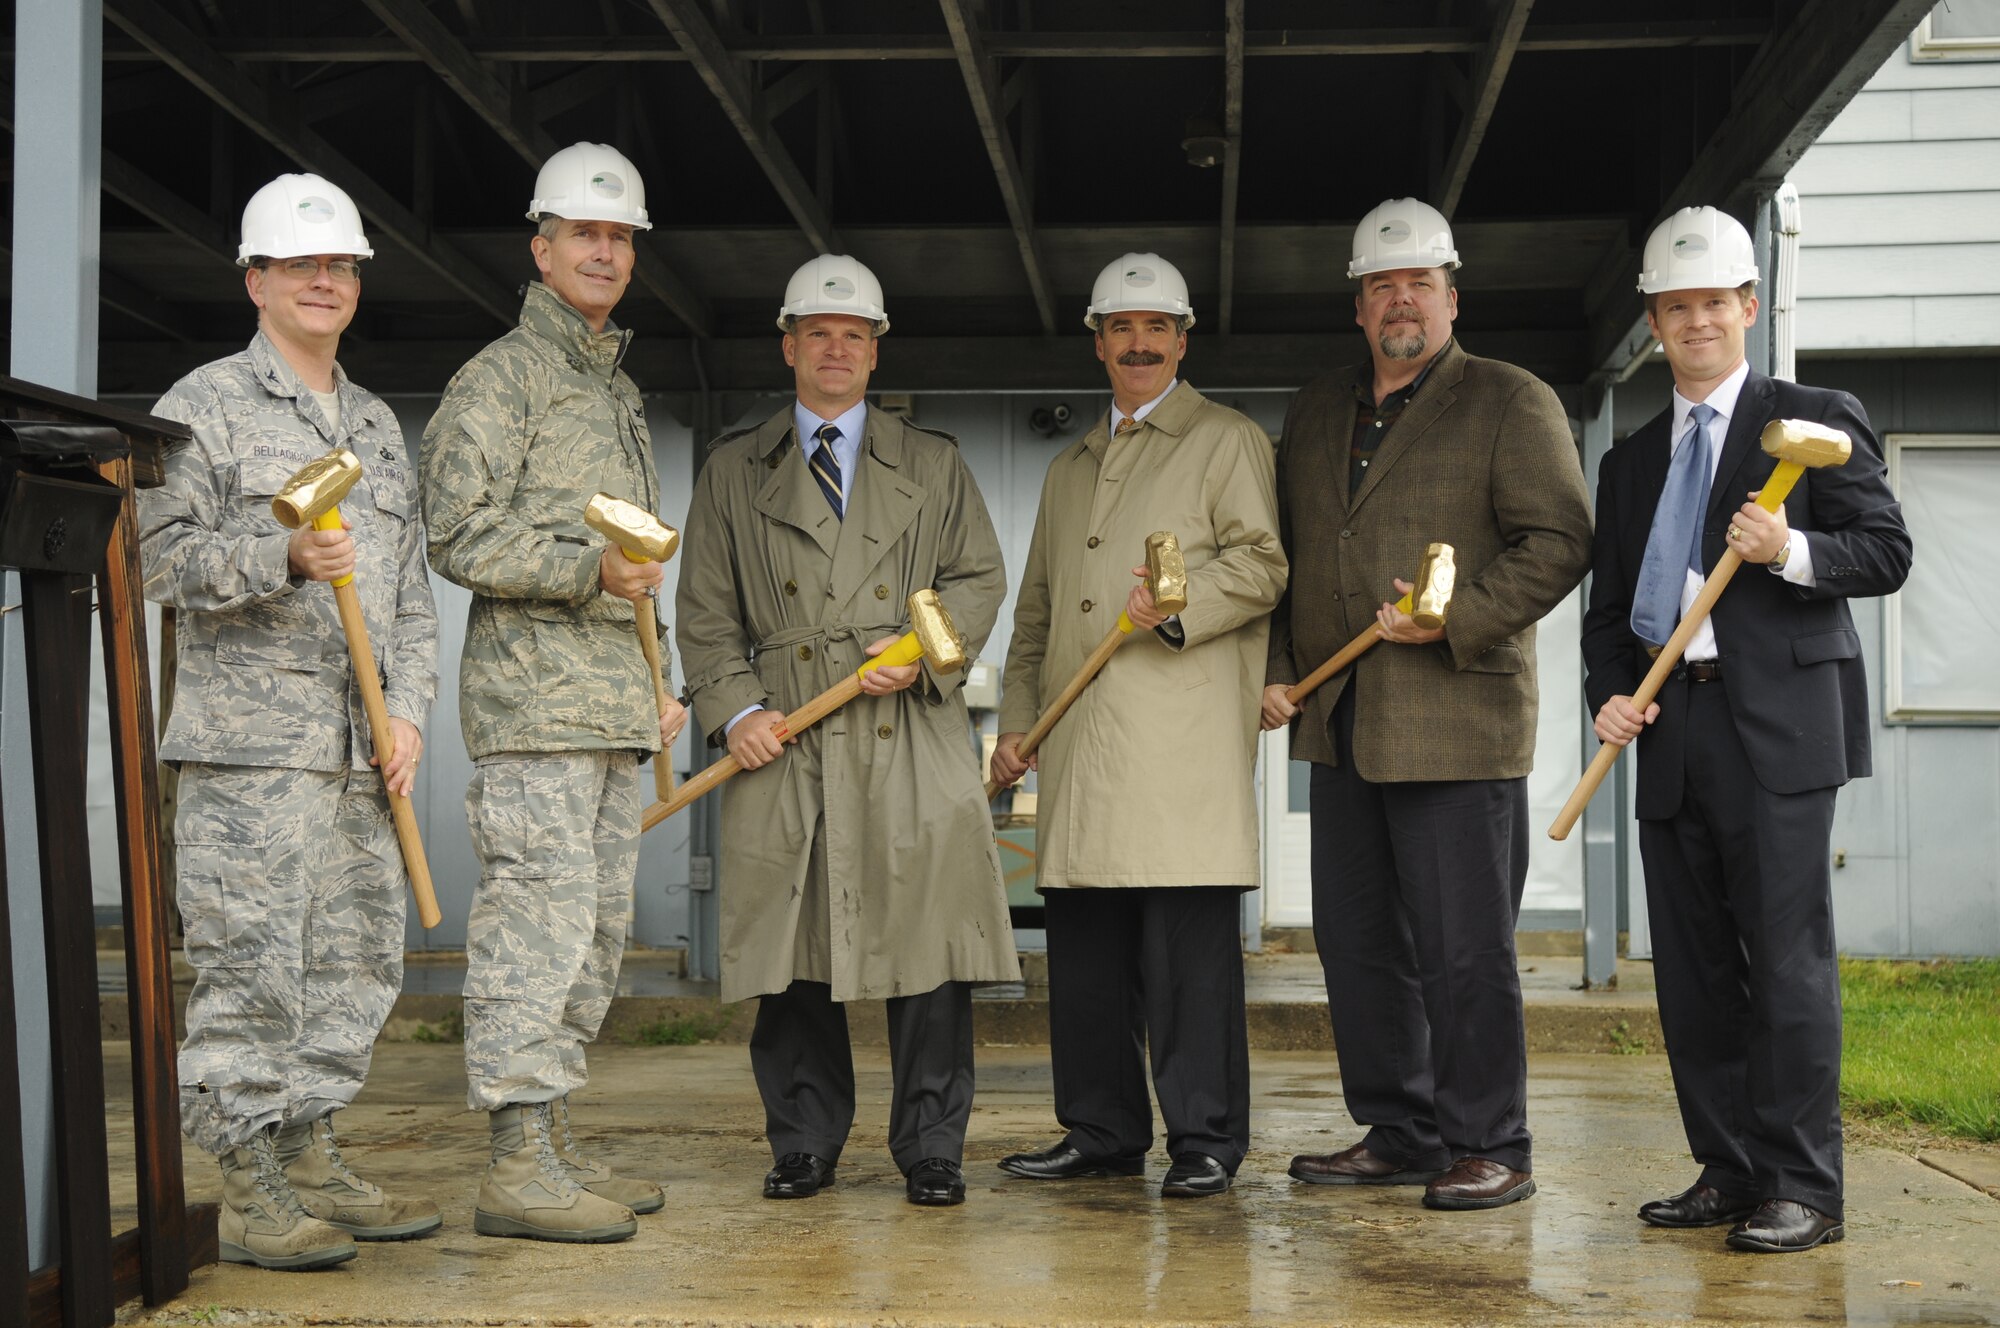 Senior leaders from the 11th Wing and Hunt Pinnacle Development wield six golden sledgehammers to take the first strike at the first home built in the old Rickenbacker South neighborhood on Bolling, 3418 Lackland Way. From left to right, Col. Brian Belacicco, Air Force District of Washington Logistics and Mission Support director; Col. Jon A. Roop, 11th Wing commander; Dan Ray, Capmark Finance managing director; Robin Vaughn, Hunt Development executive vice president; Jeff Cole, Hunt Construction vice president; and Brad Reisinger, Pinnacle Development vice president. (U.S. Air Force photo by Staff Sgt. Raymond Mills)